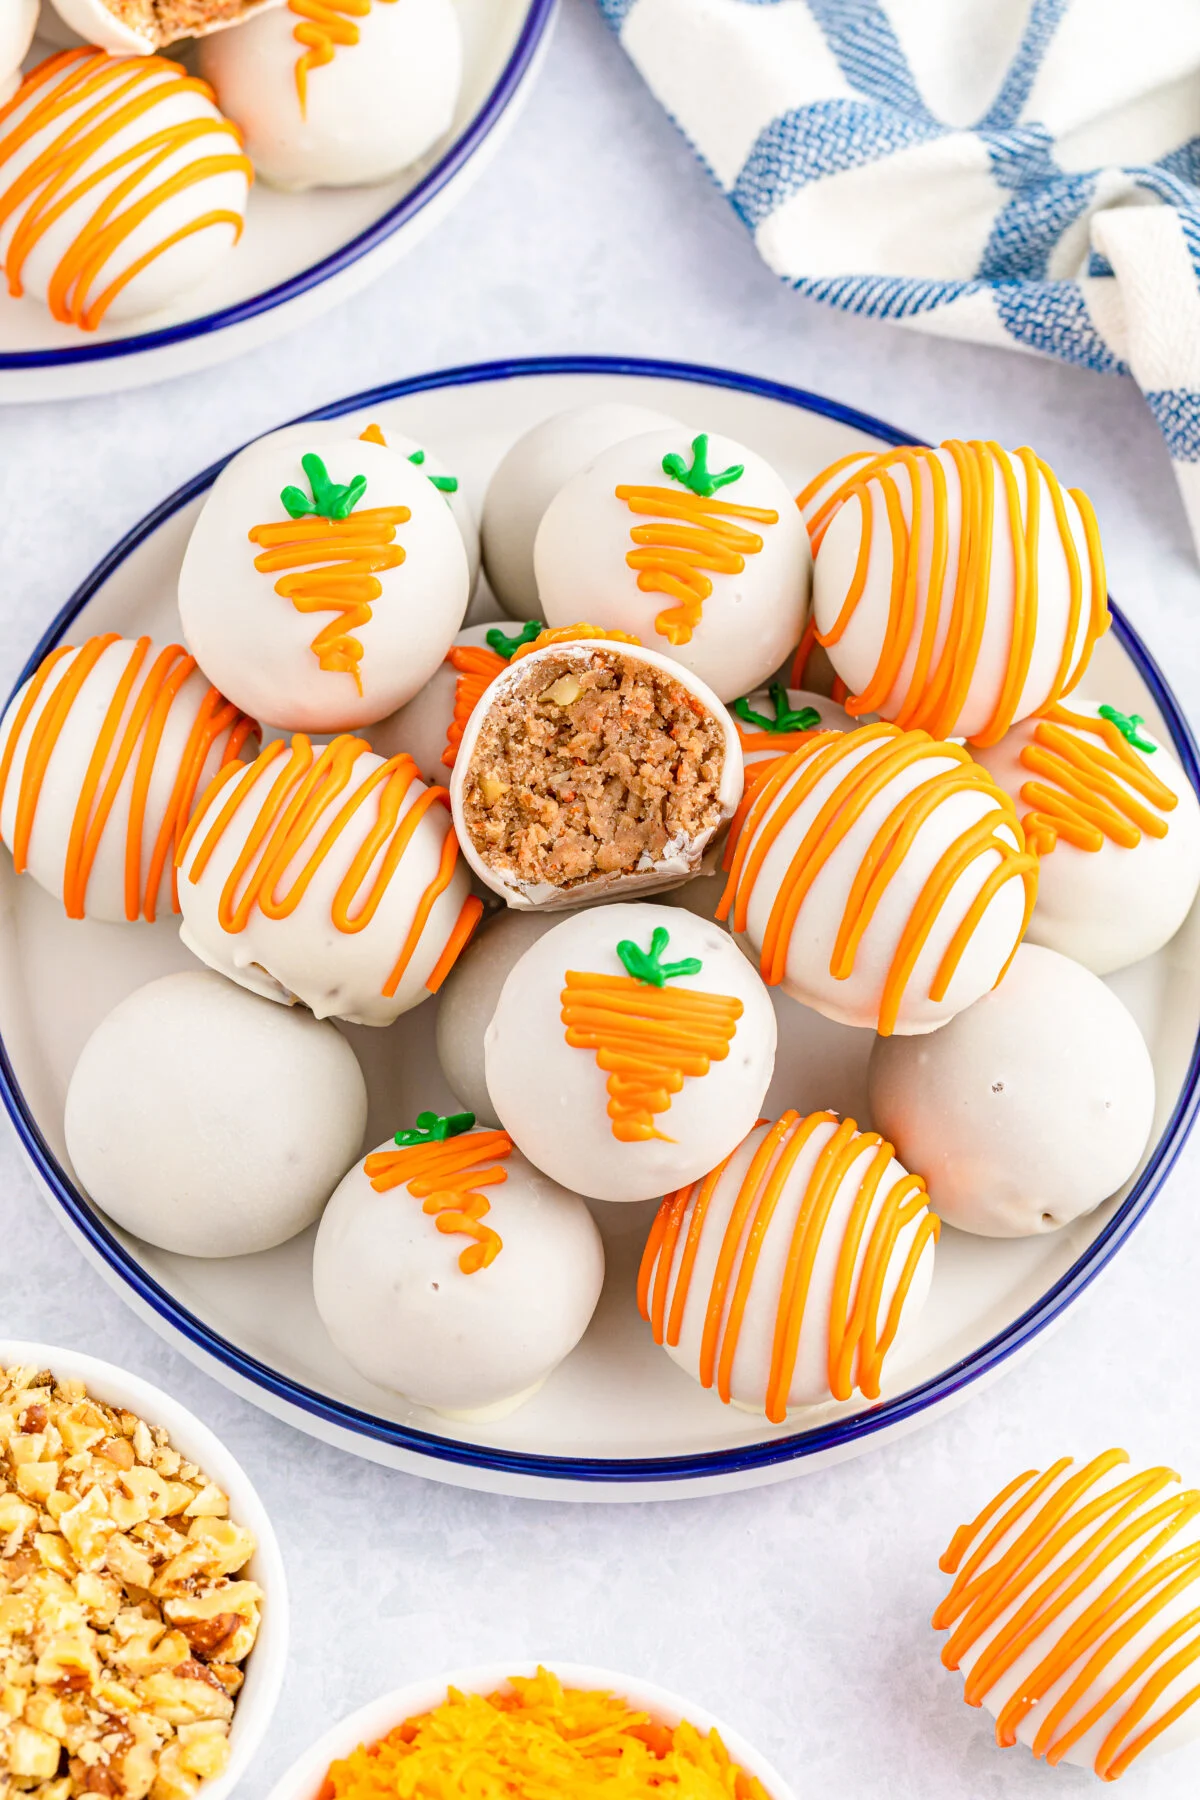 A blend of carrot cake mix, cream cheese, walnuts and white chocolate - these Carrot Cake Cheesecake Bites are a twist on classic carrot cake!